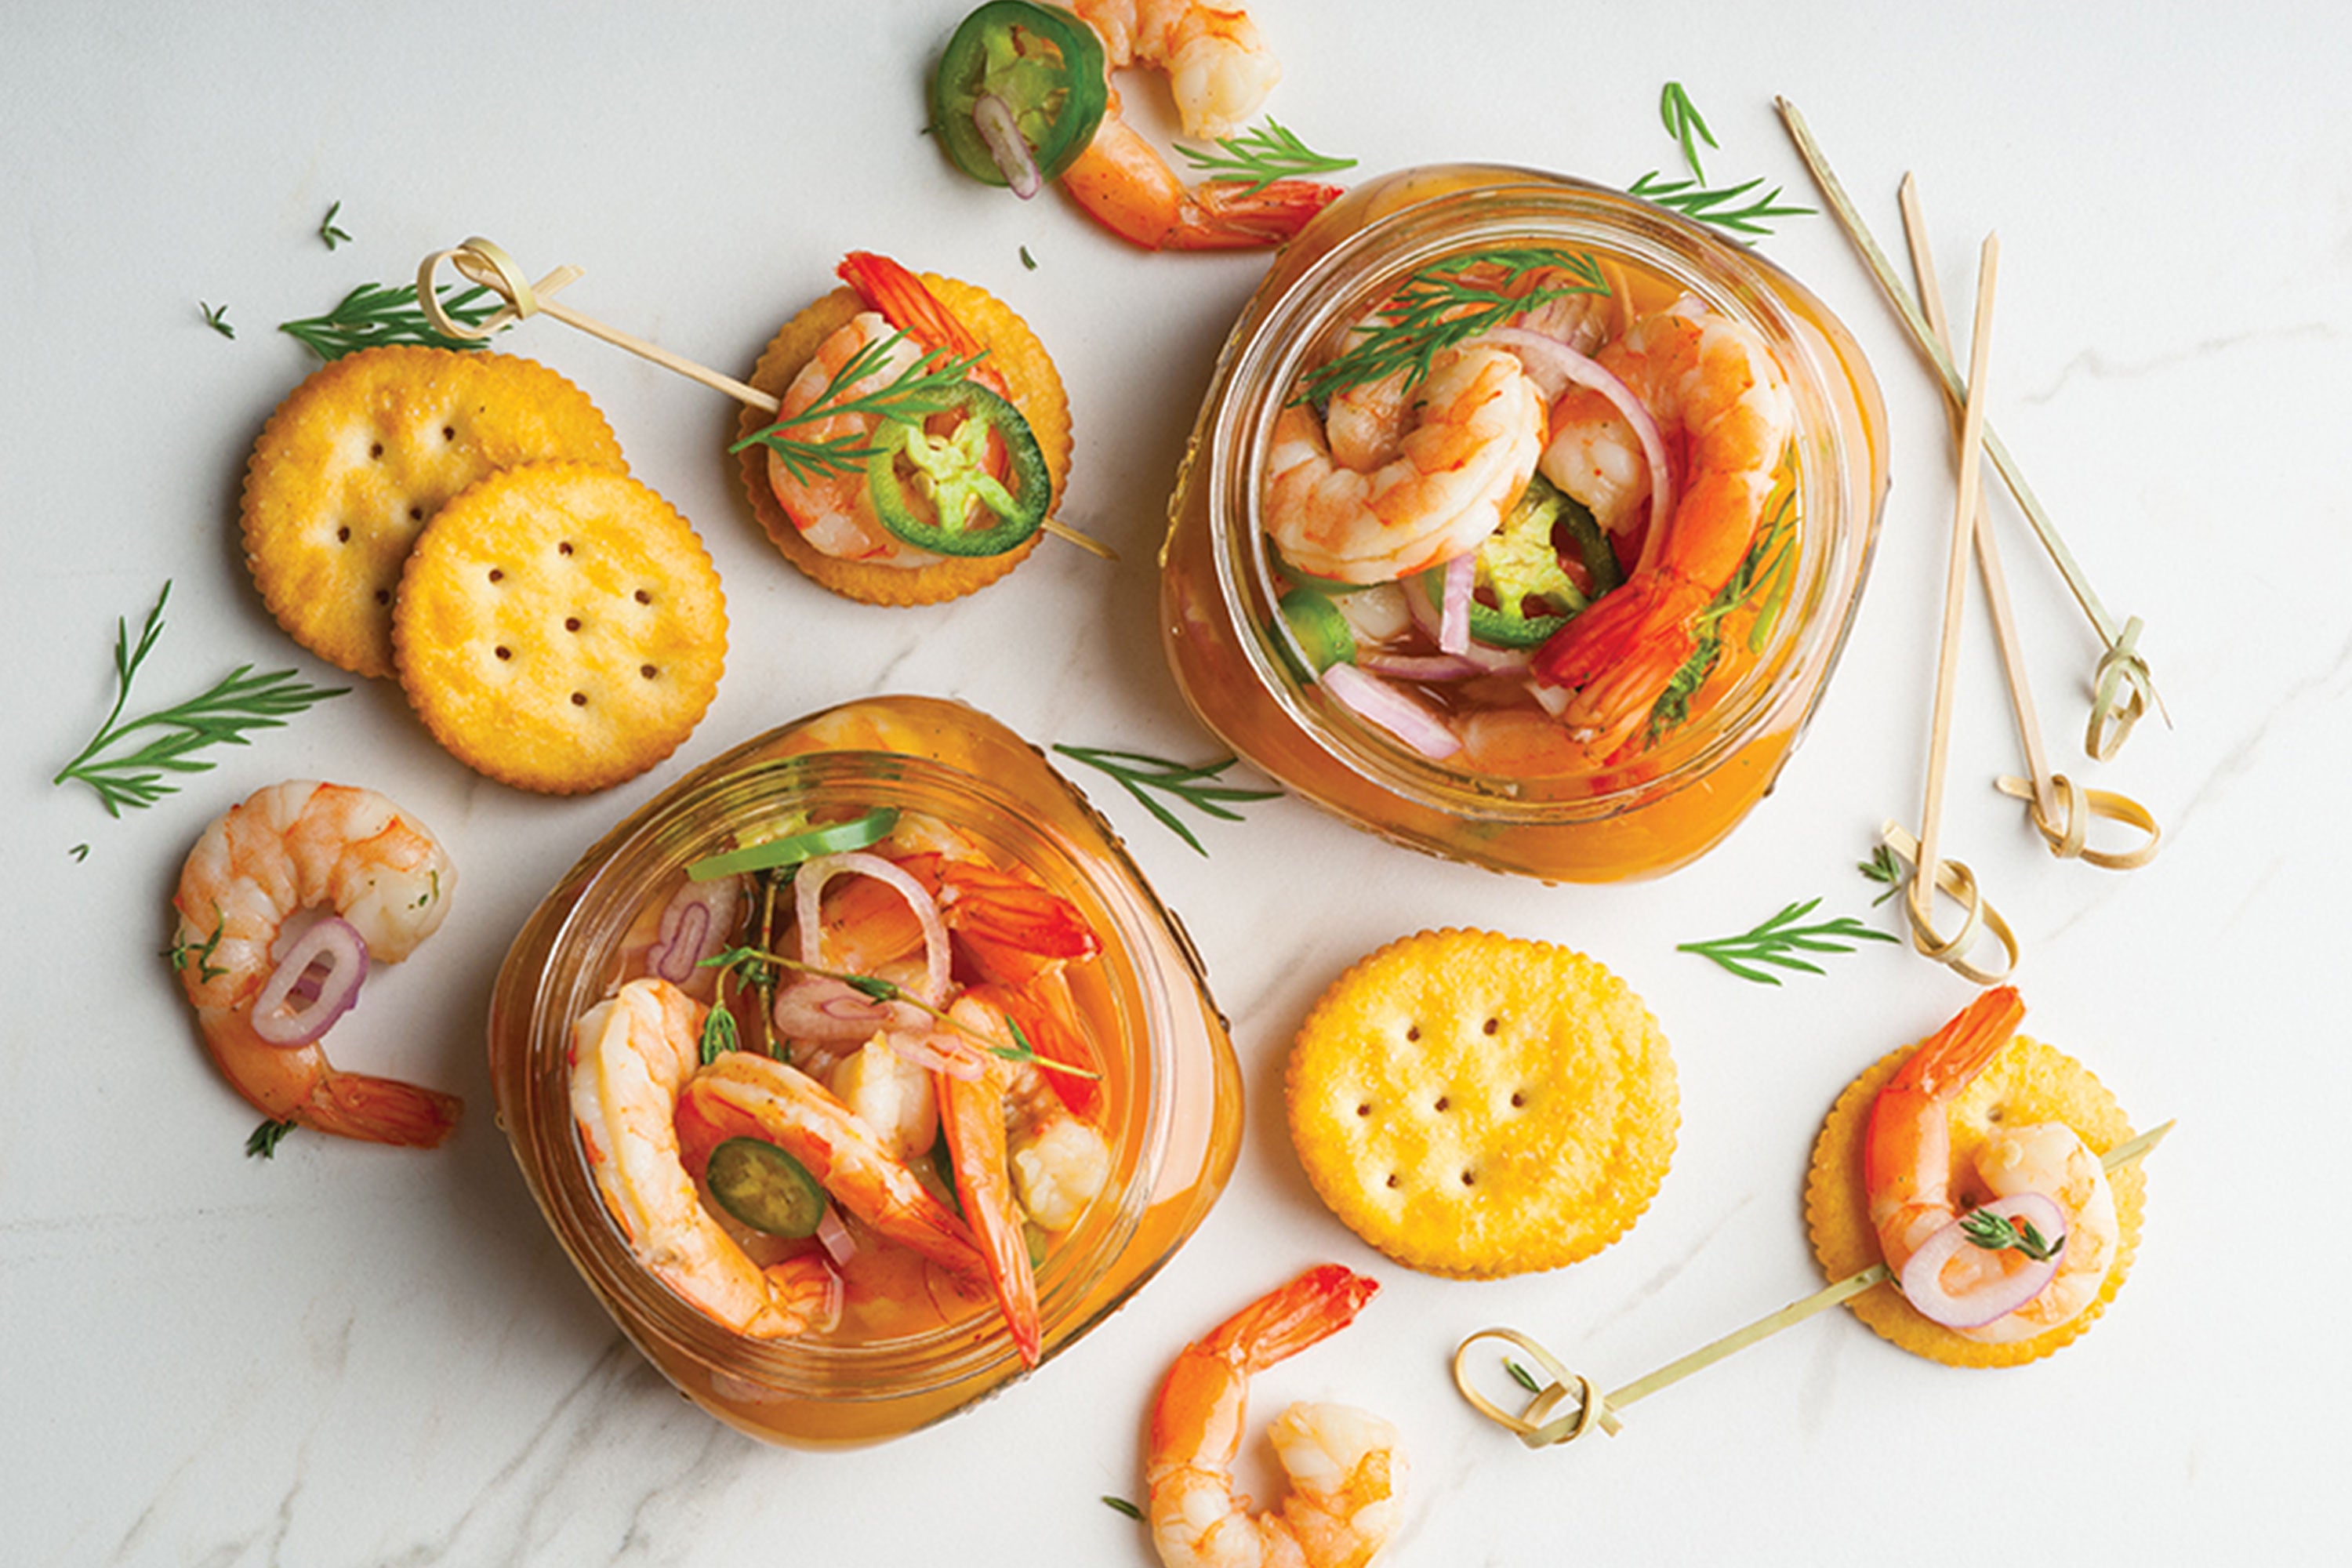 Two jars of pickled shrimp with crackers, small skewers, and pickled vegetables